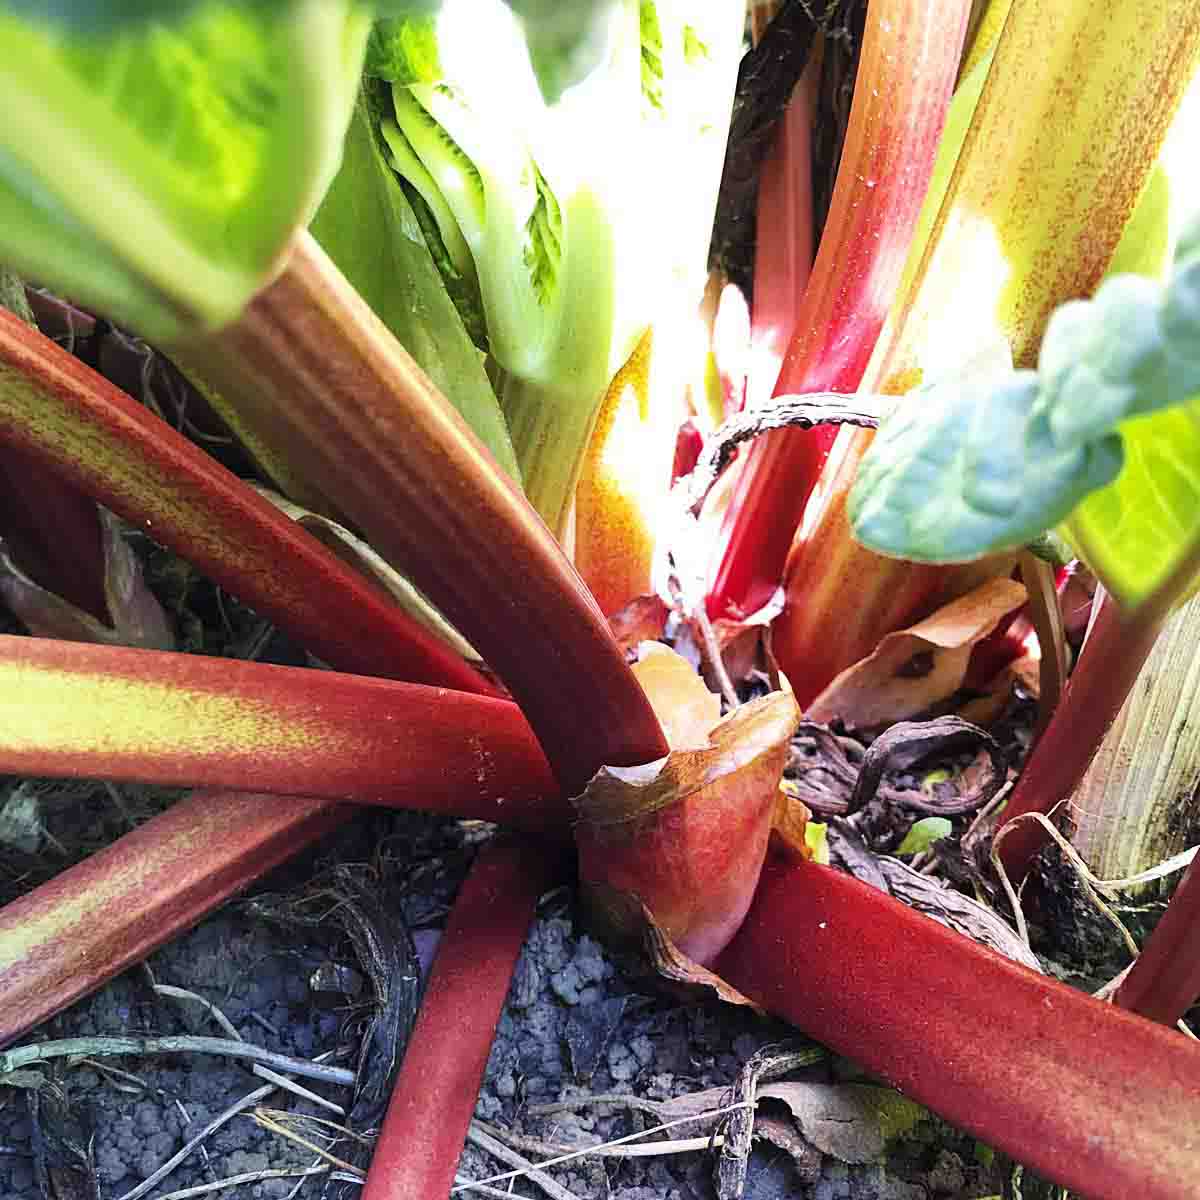 Red rhubarb stems growing from the ground.